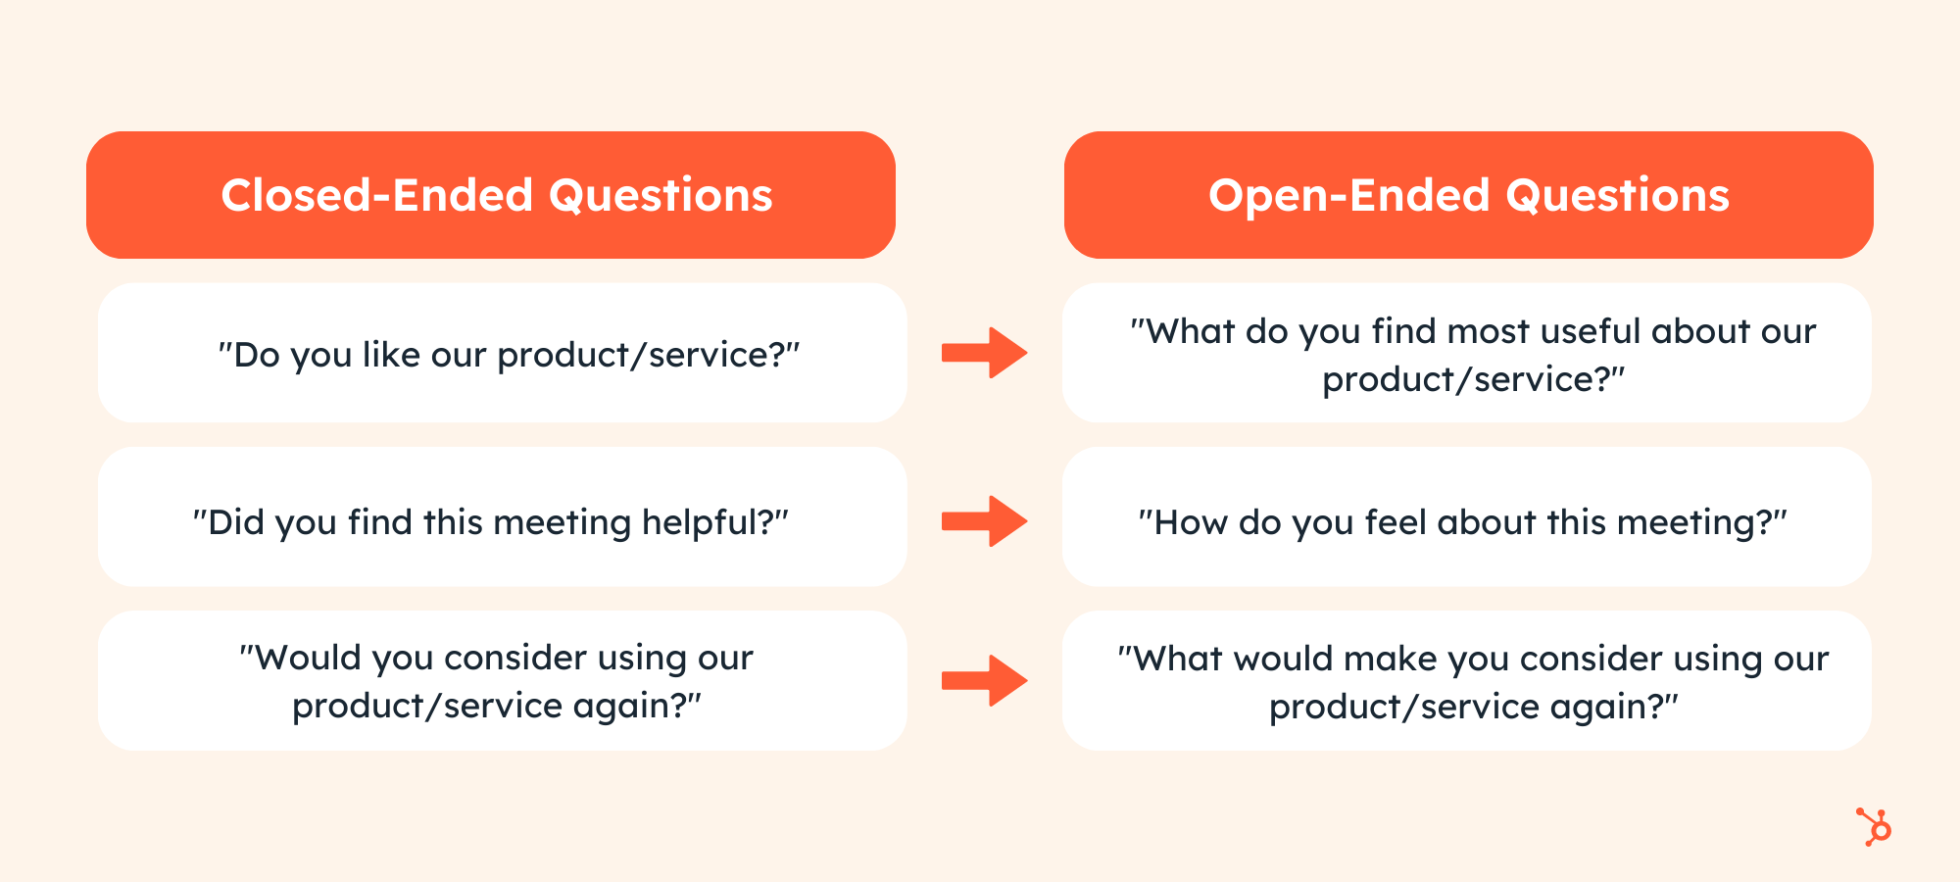 What are open ended questions and how can they improve your talk to listen ratio?